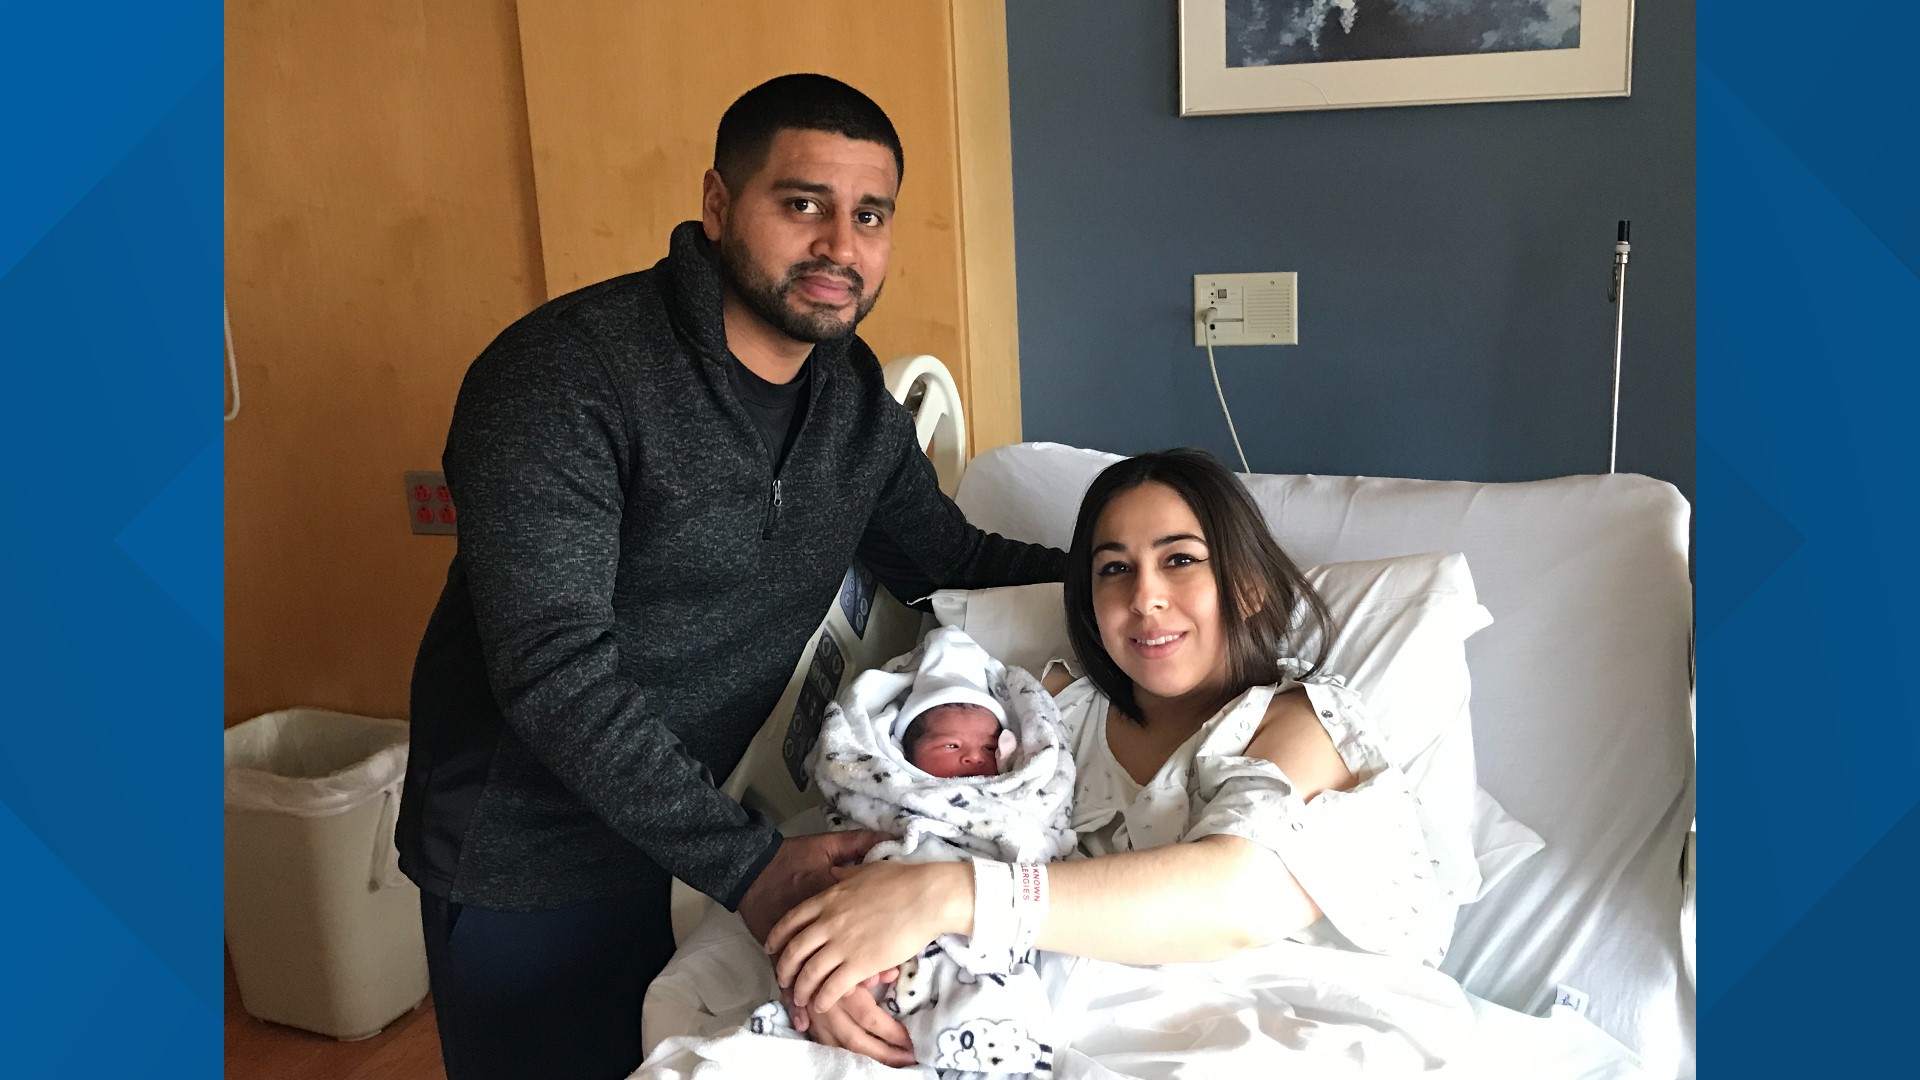 The baby, who was delivered at 1:25 a.m. on New Year's Day 2021, has been named Genesis.